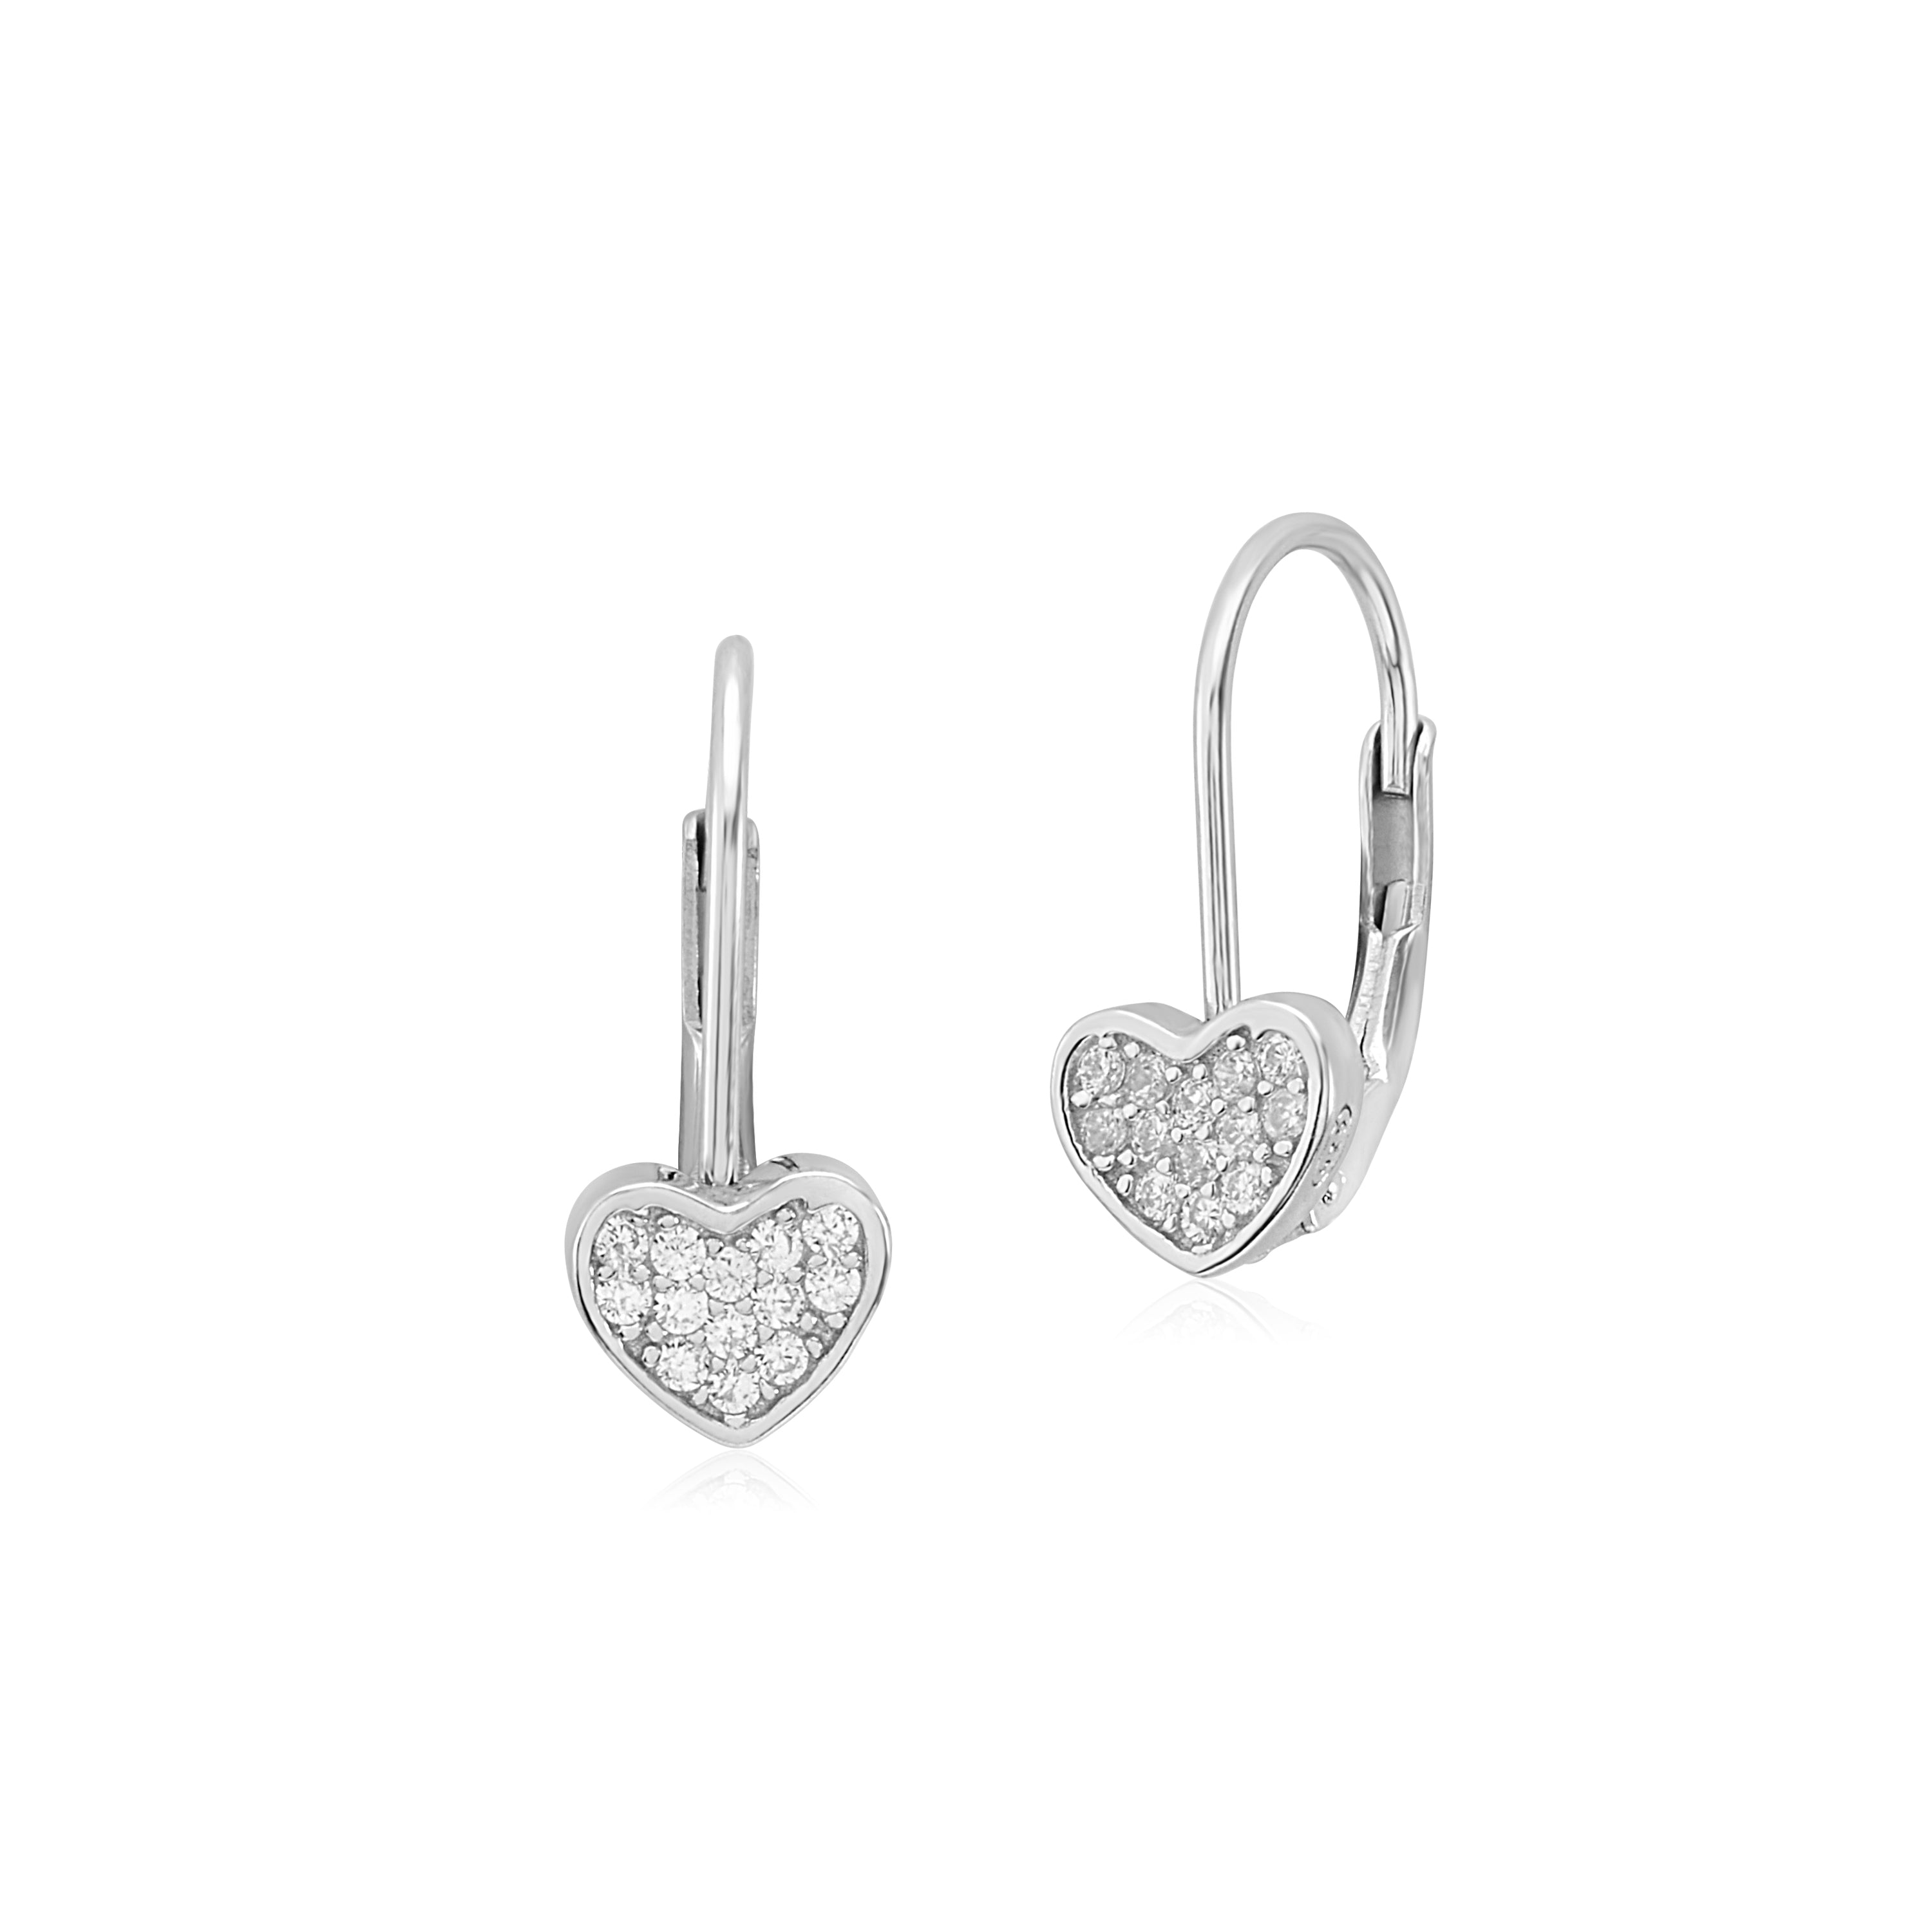 UNICORNJ Sterling Silver 925 or Dark Pink Kids Small Fixed Heart Leverback Earrings with Pave CZ Italy